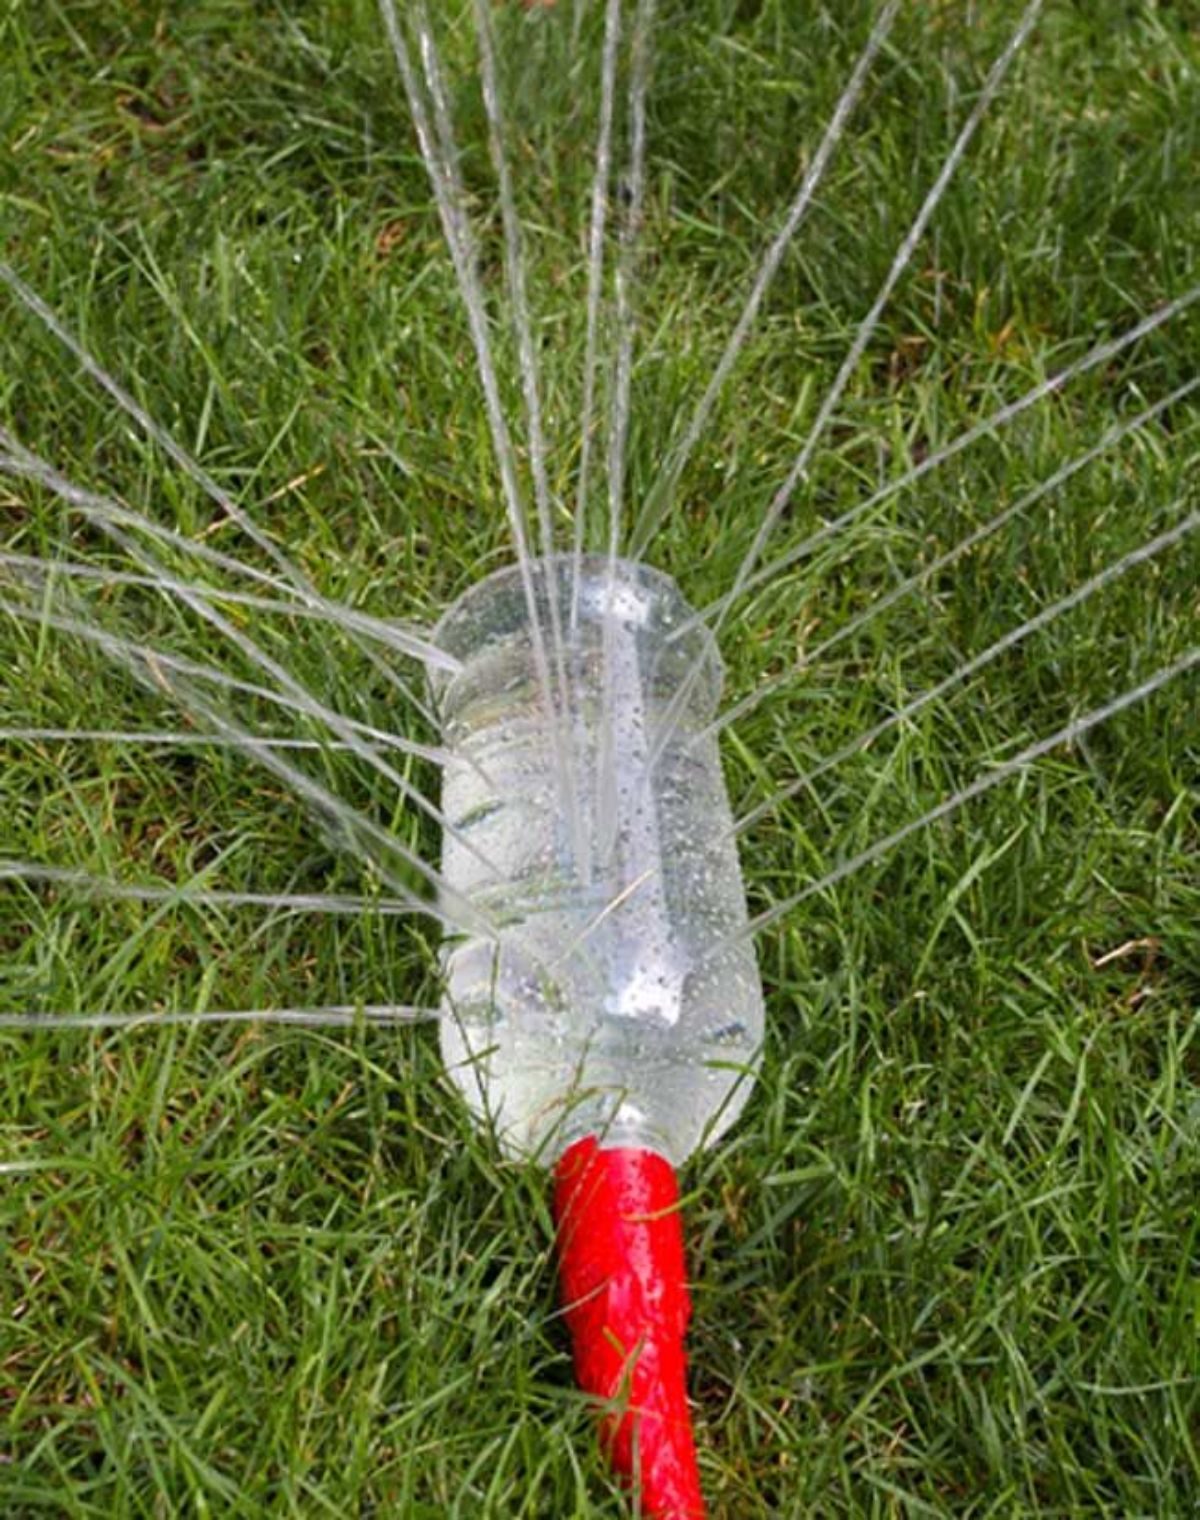 On the grass is a water bottle attached to a hose with holes in it meaning water is gushing out